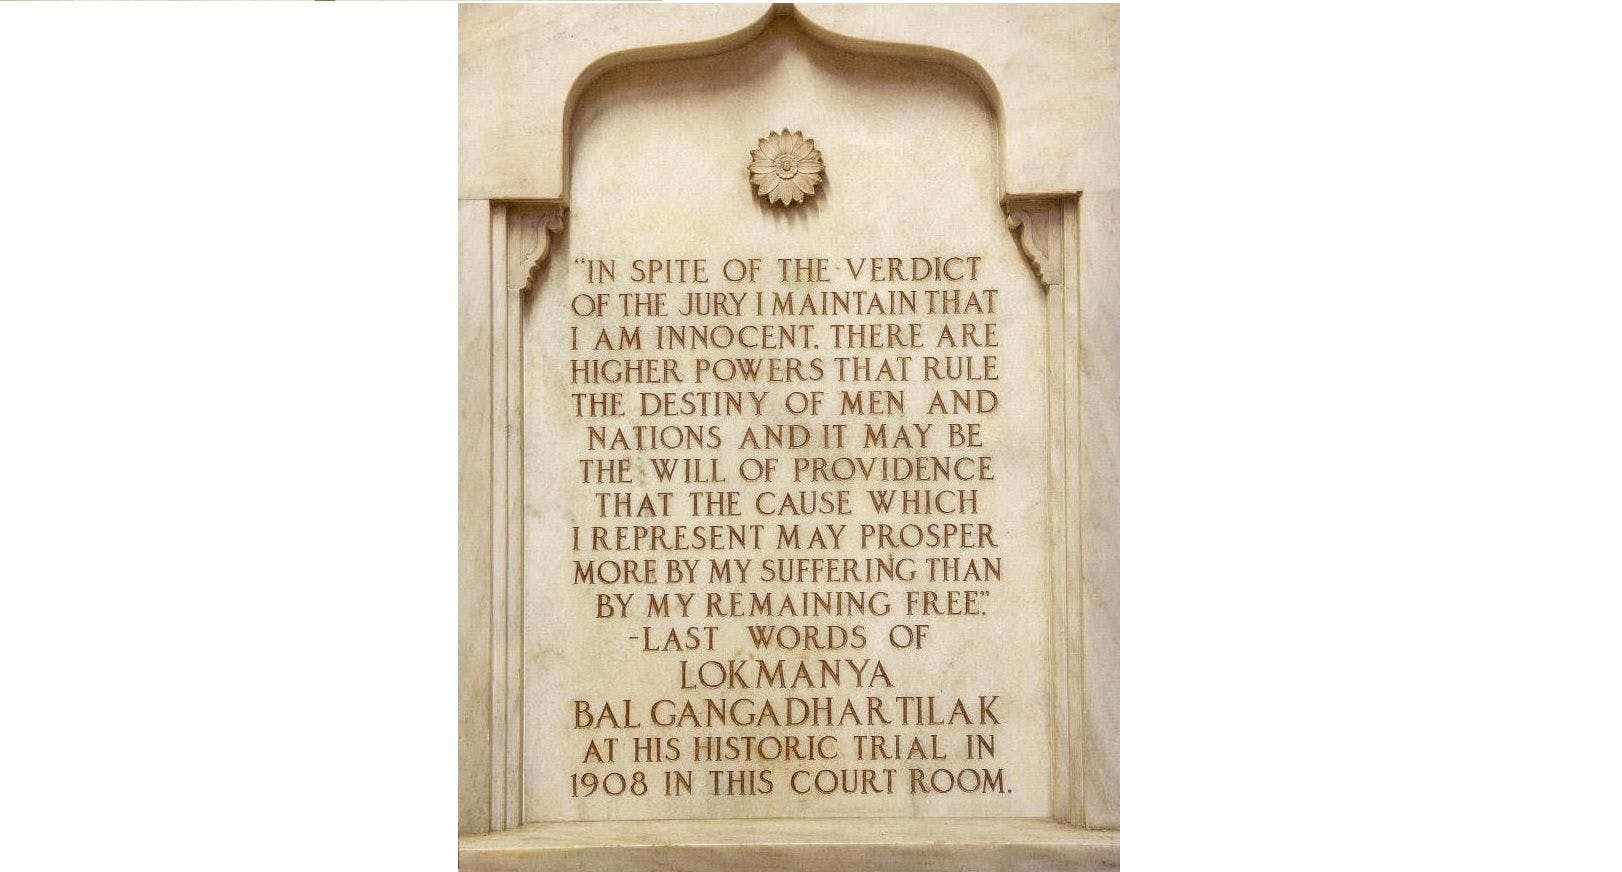 The inscription at Central Court of Bombay